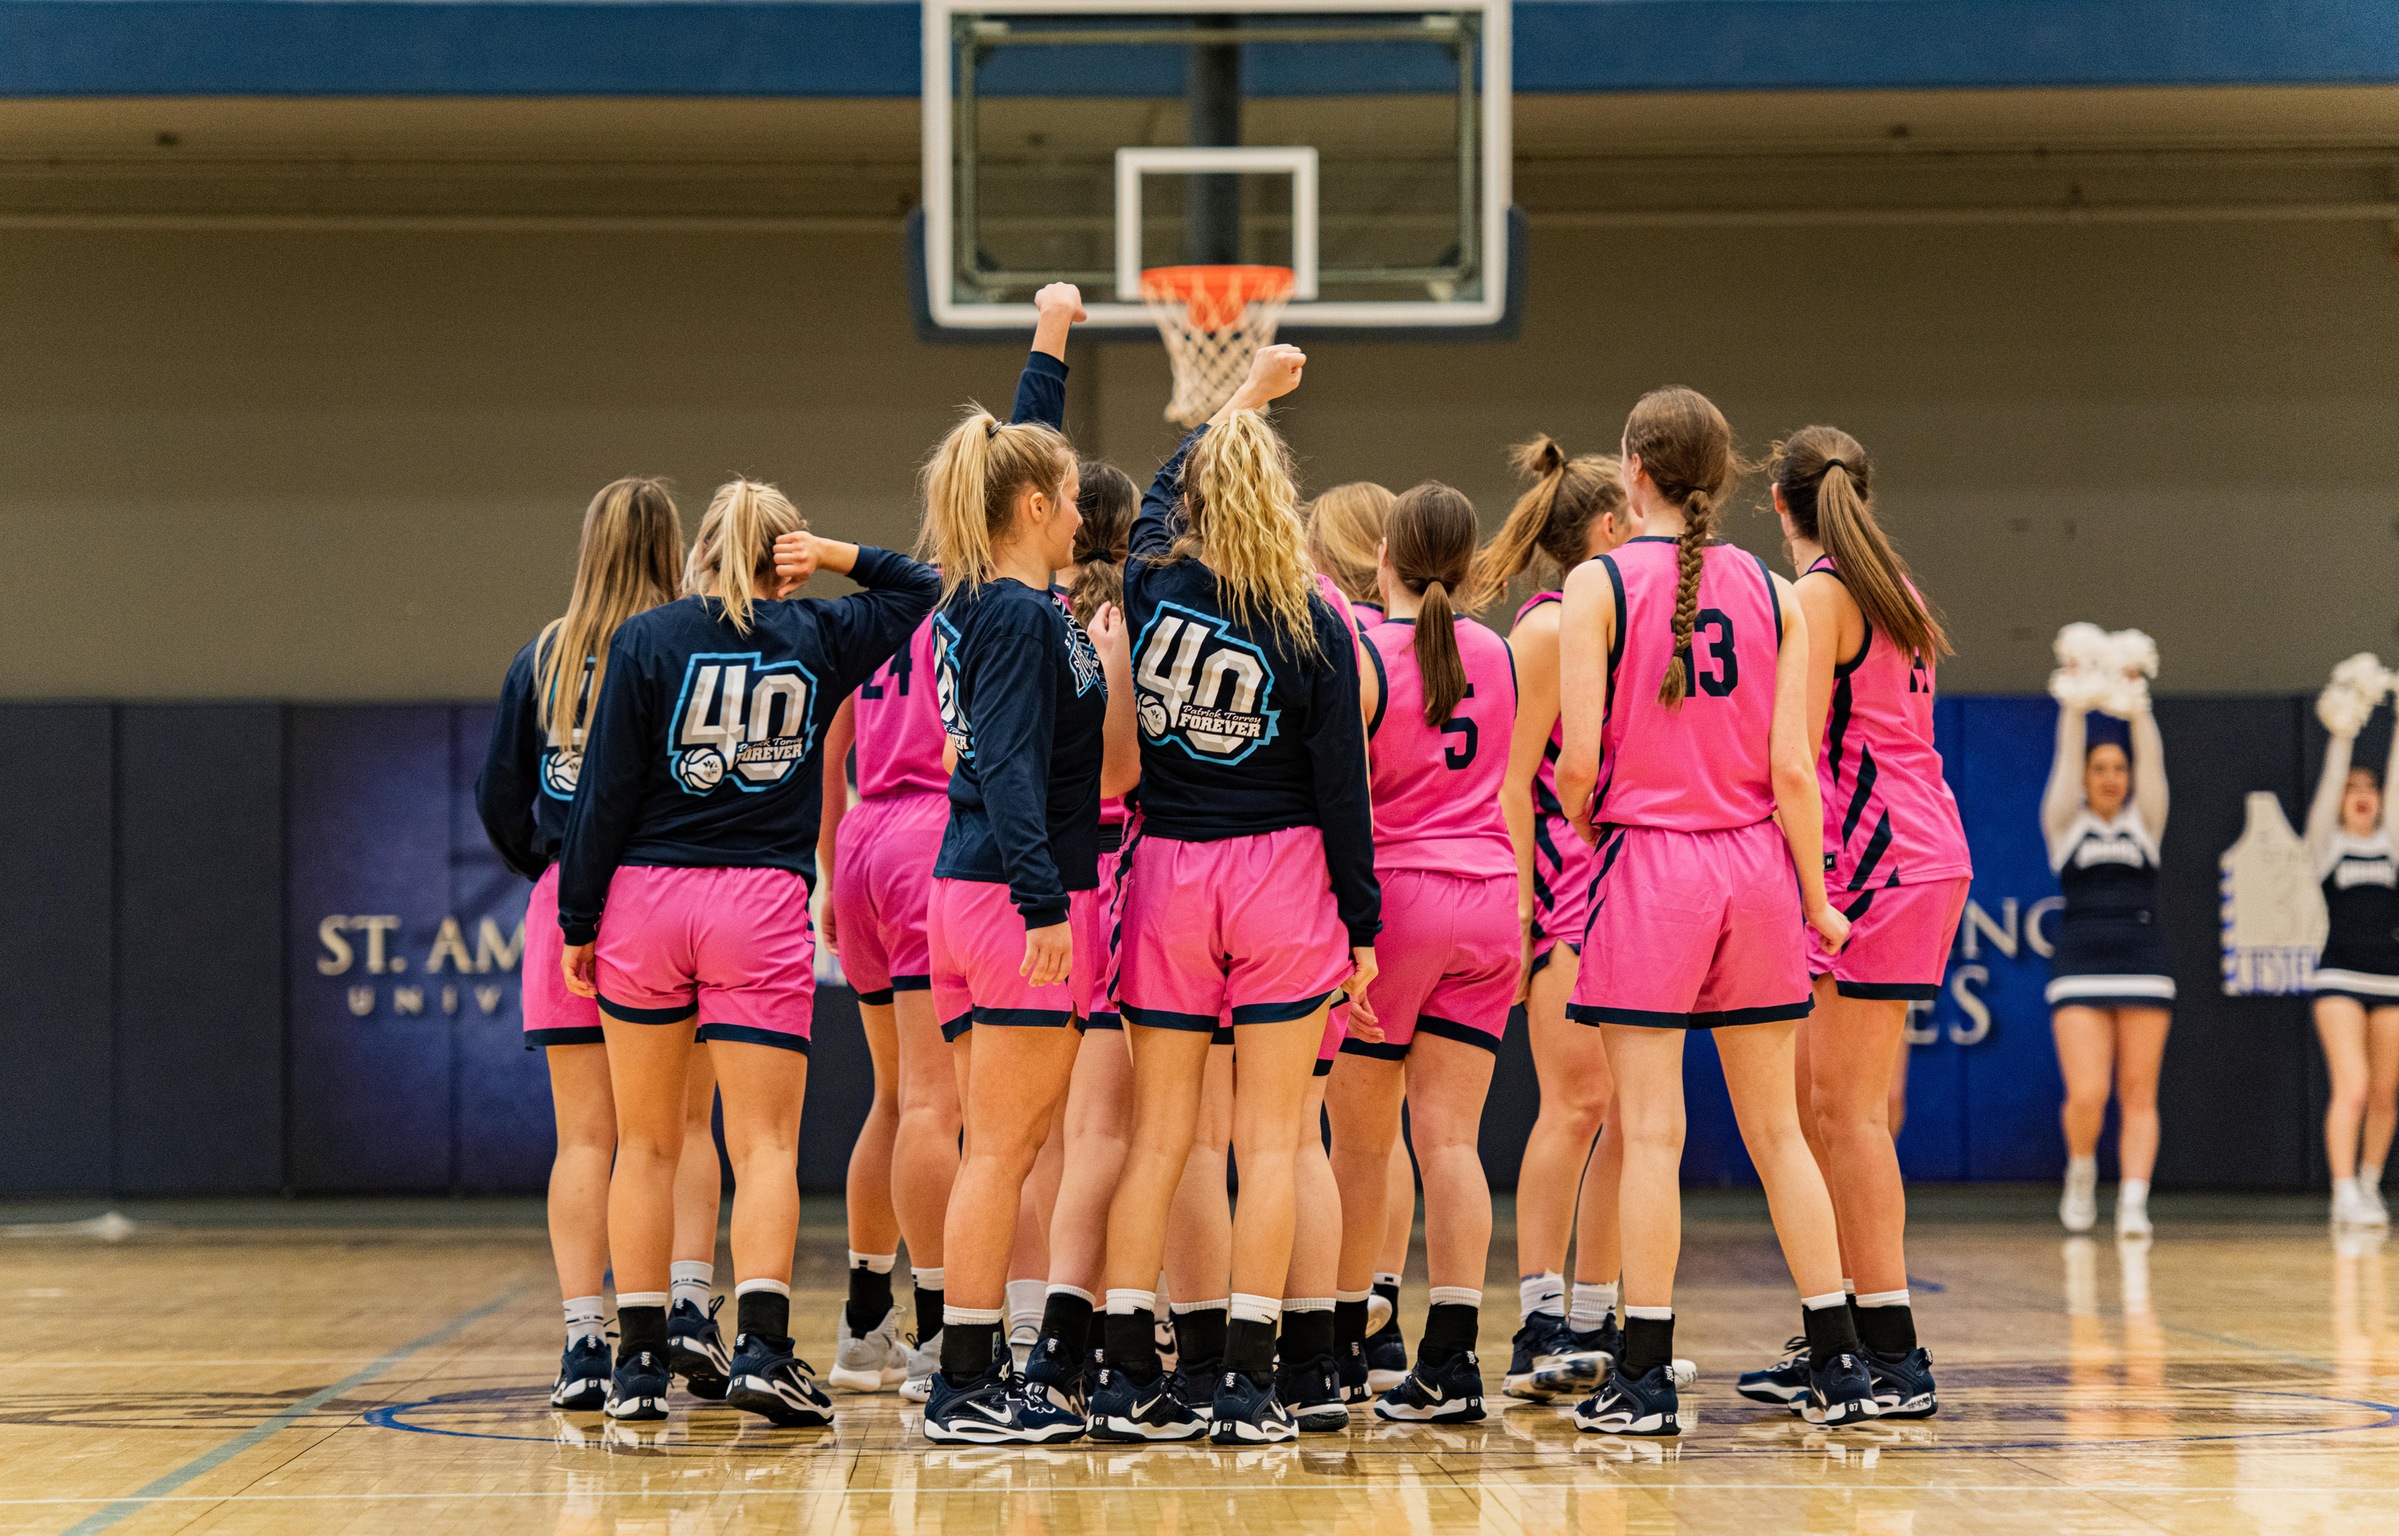 Sign up for SAU Women's Basketball Summer Camps